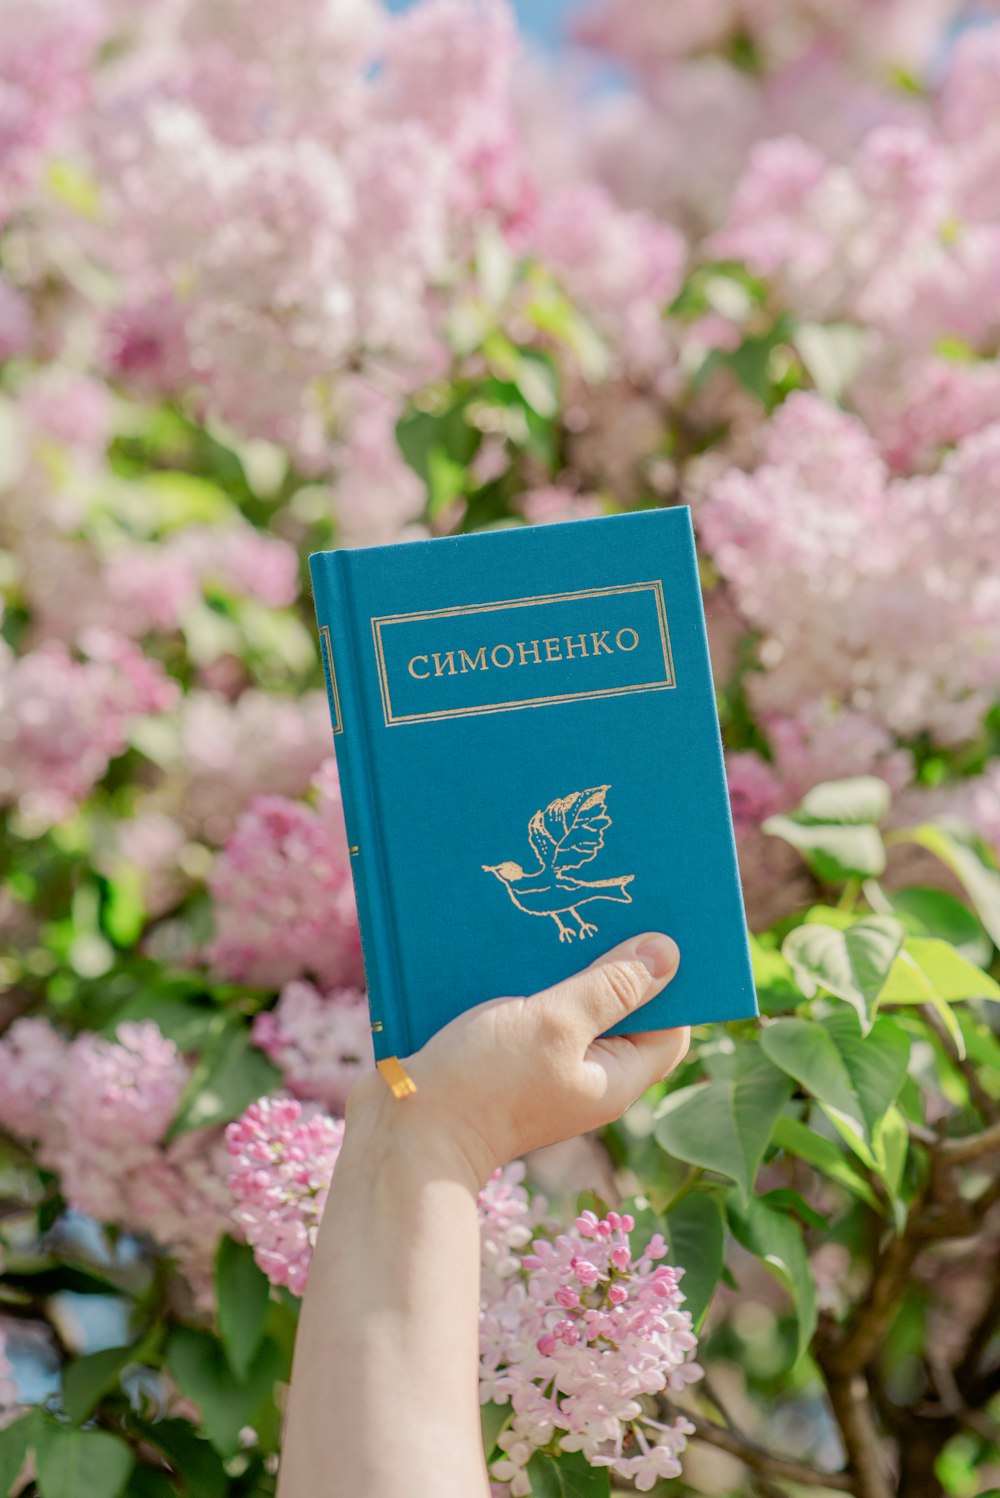 a person holding up a blue book in front of pink flowers